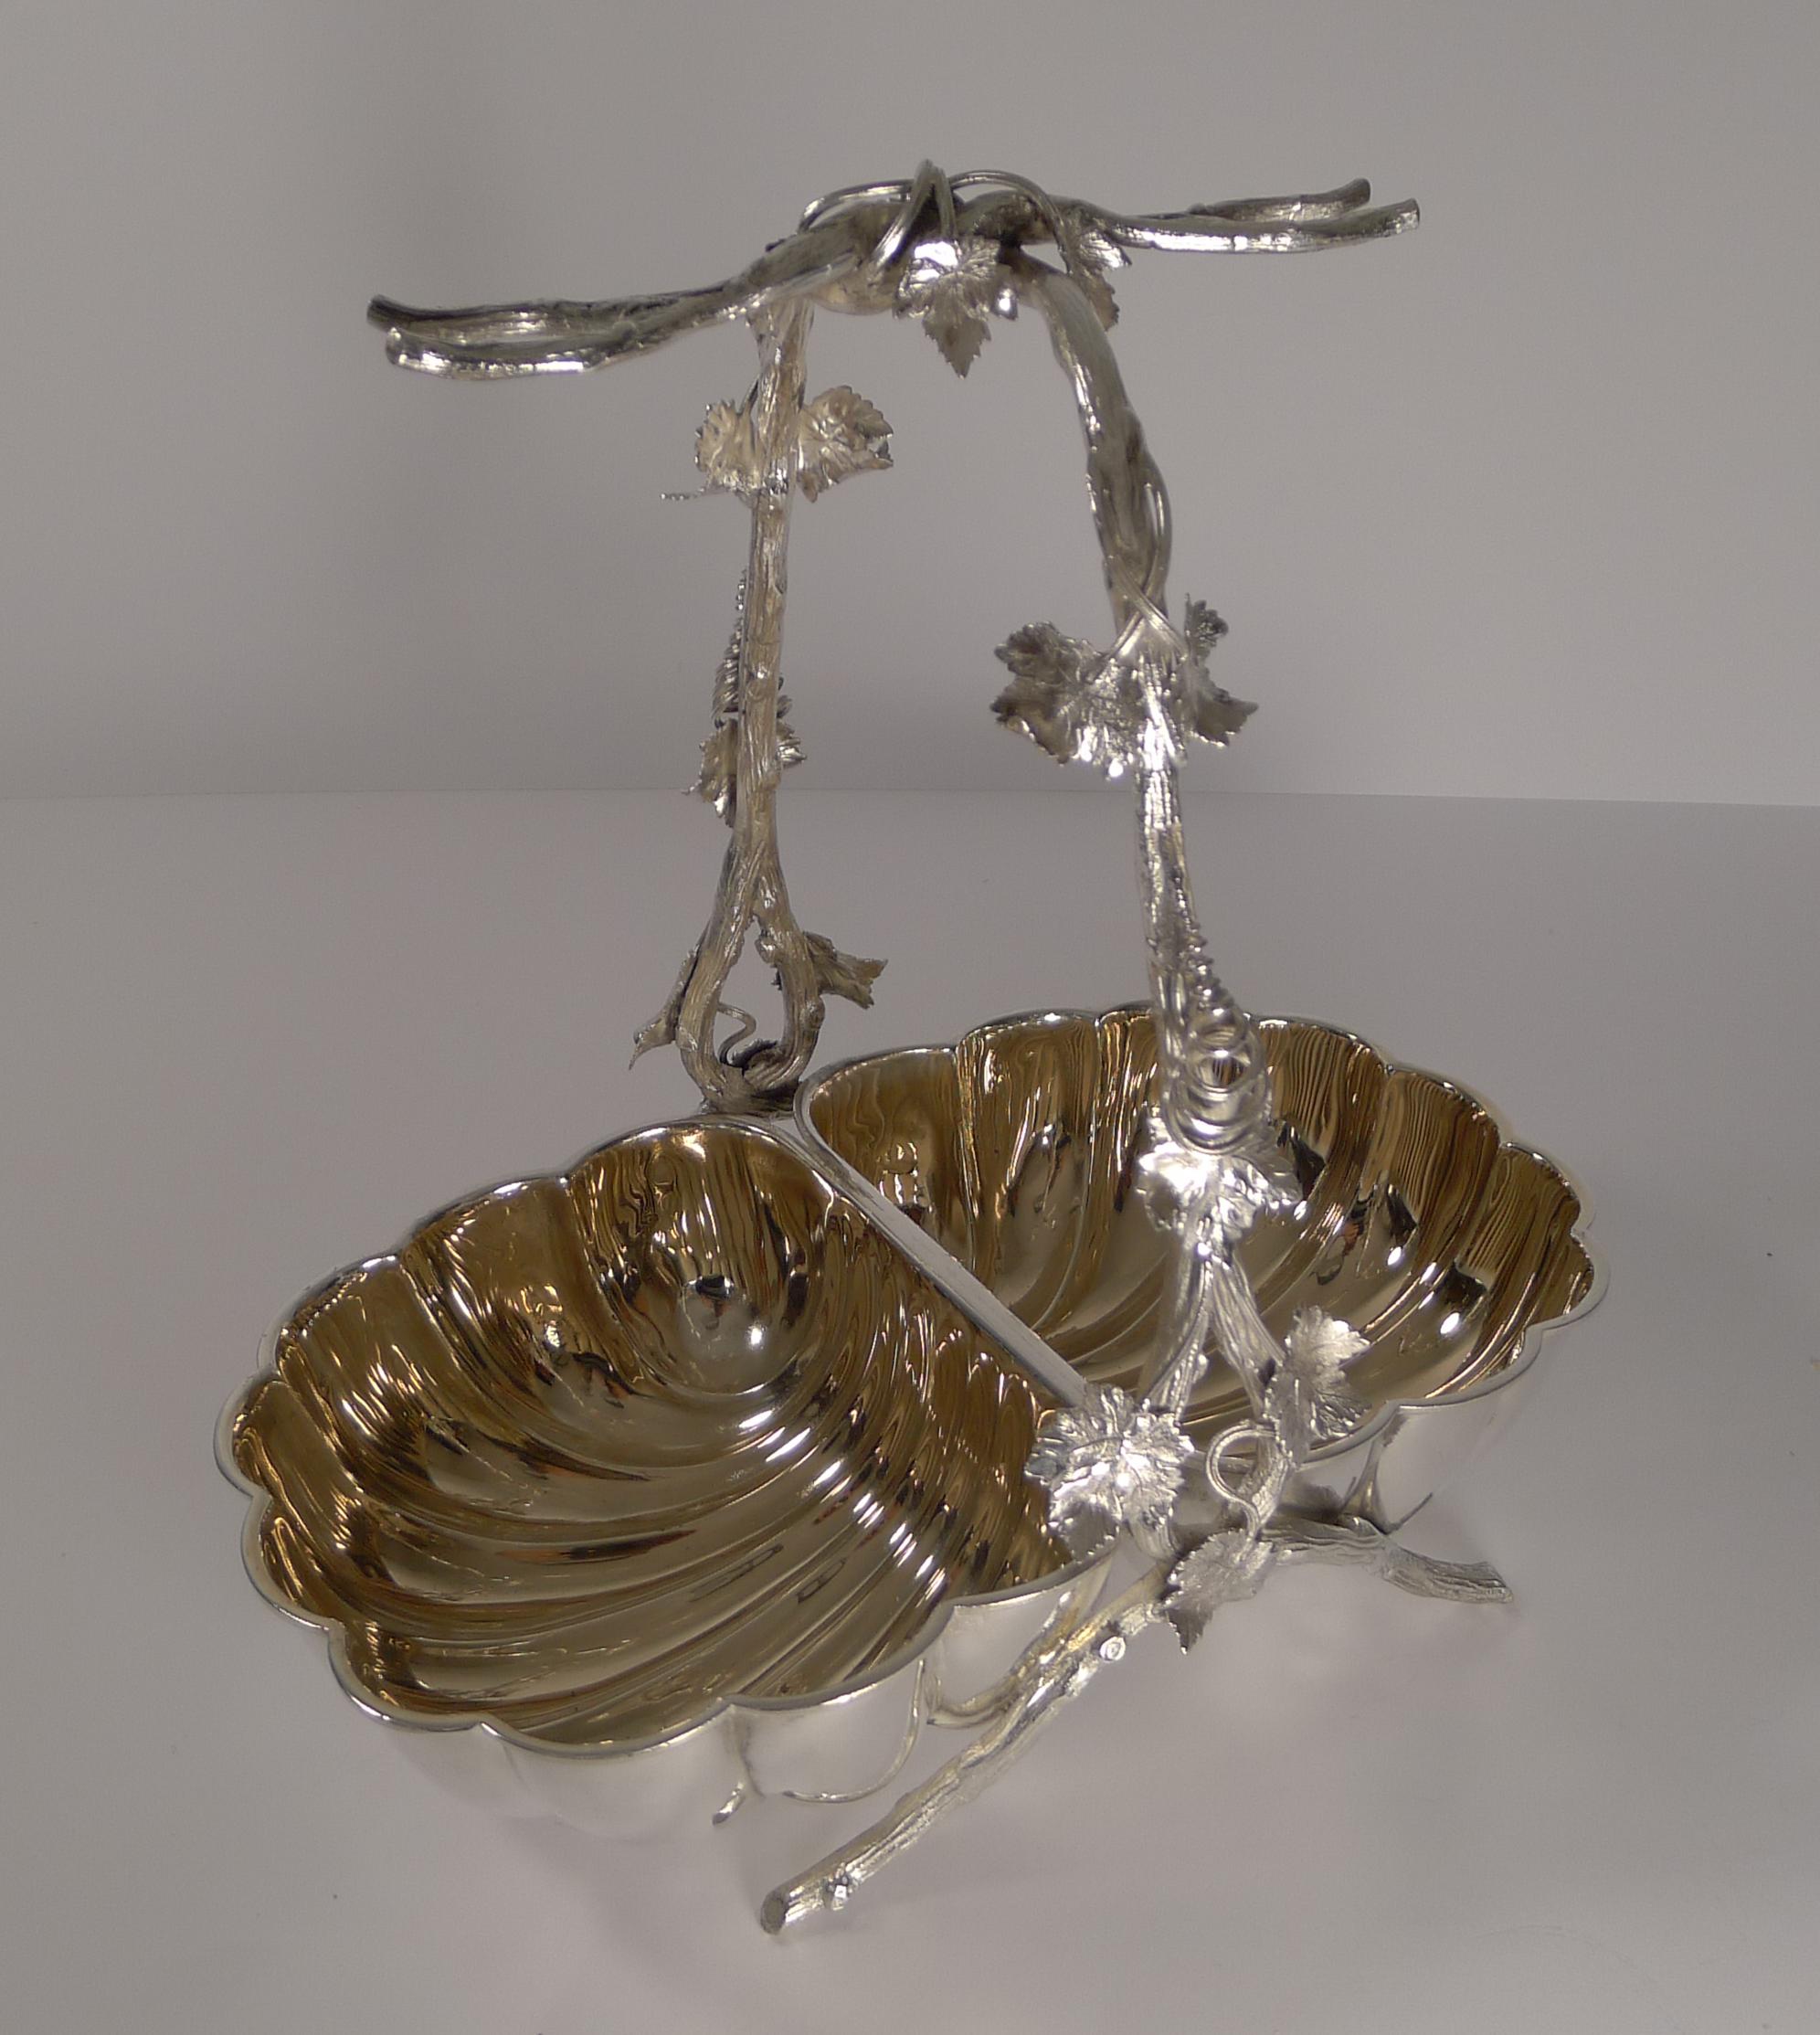 About as good as they get, this is a truly special silver plated grape dish with double shell shaped bowls with naturalistic supports decorated with vine leaves.

This dish would create a magnificent show on the sideboard or on the dining table,